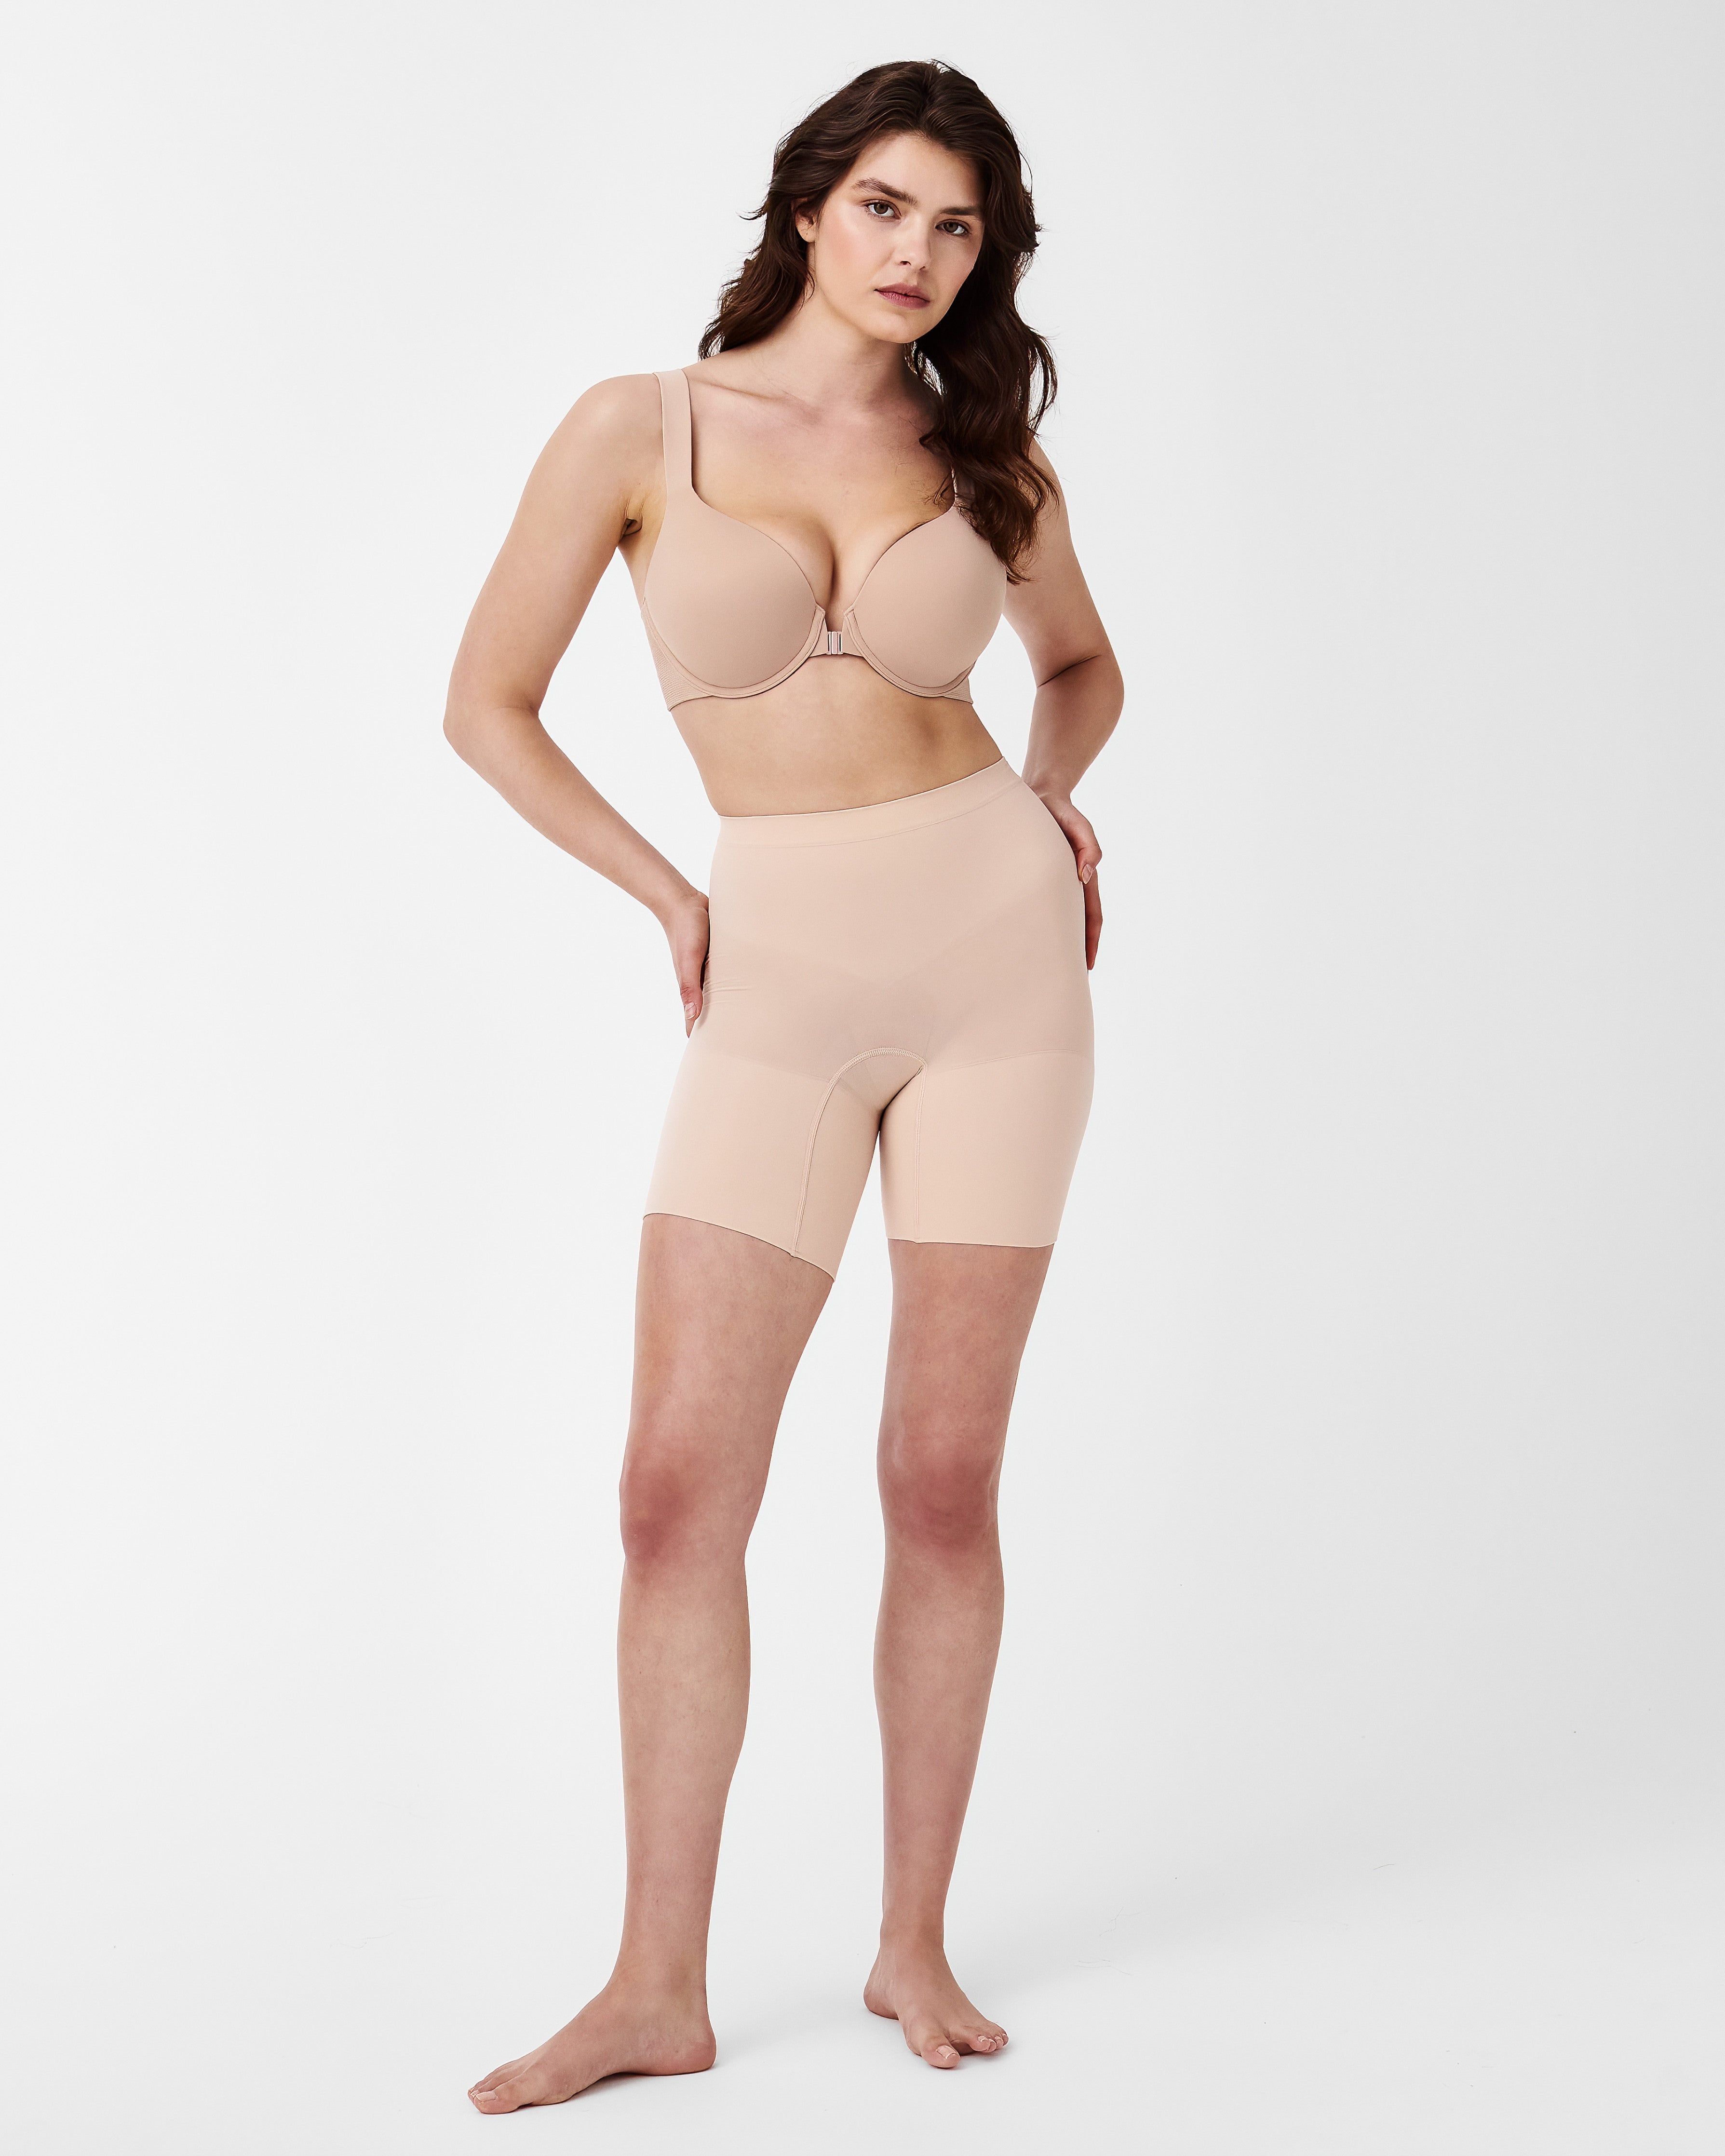 Shapewear for Pear Shaped Body with Thick Thighs from @spanx #! No rol